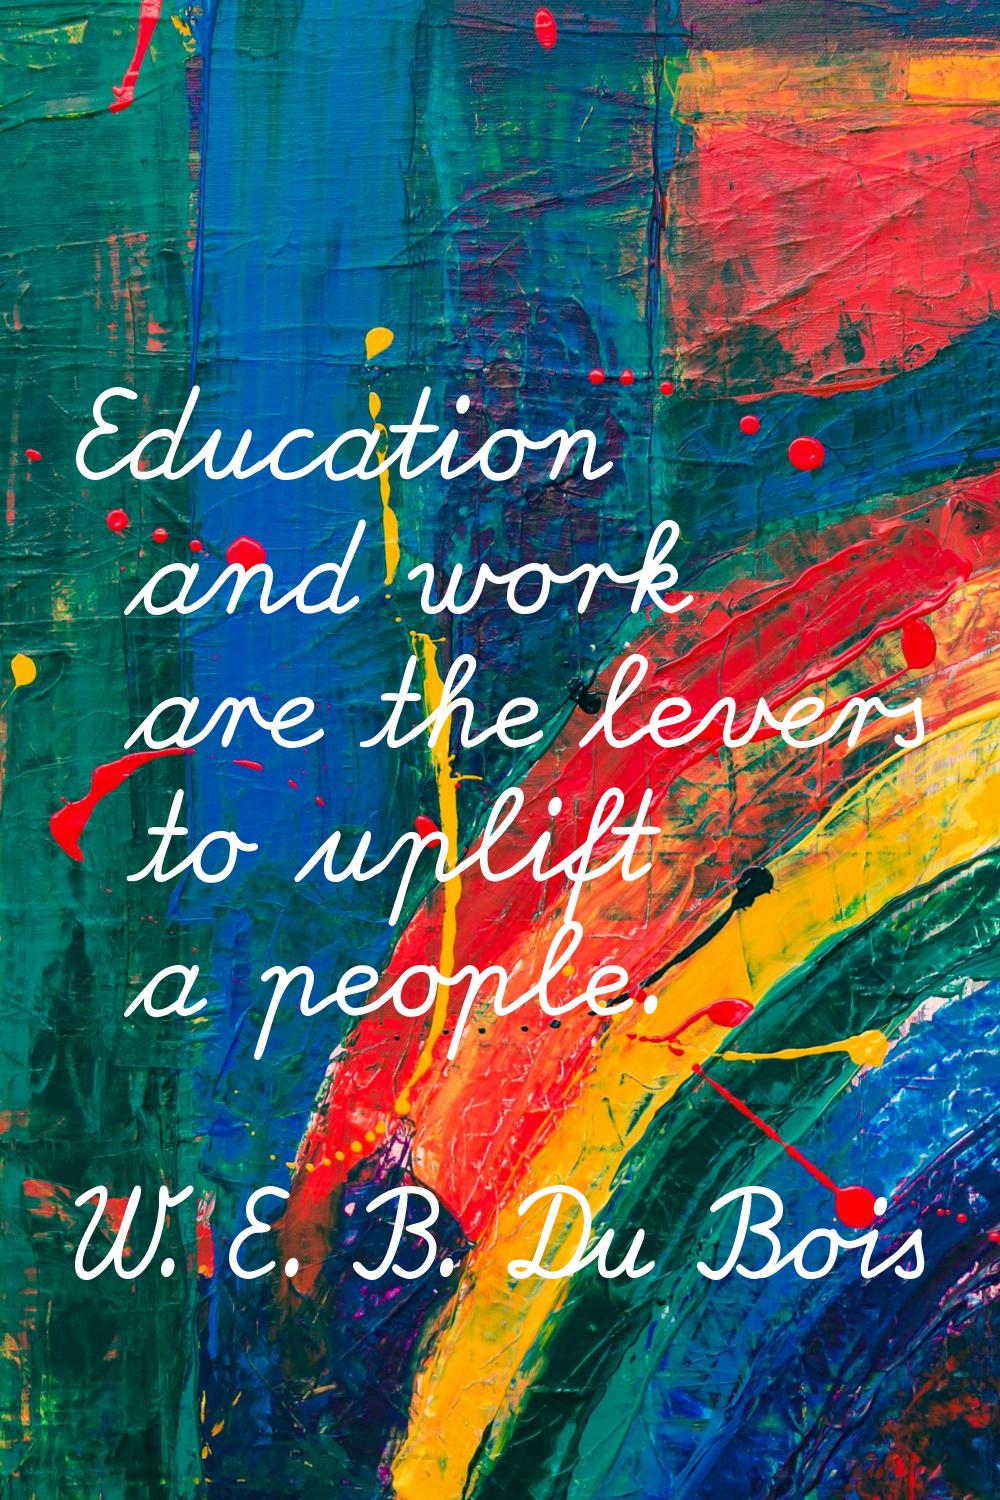 Education and work are the levers to uplift a people.